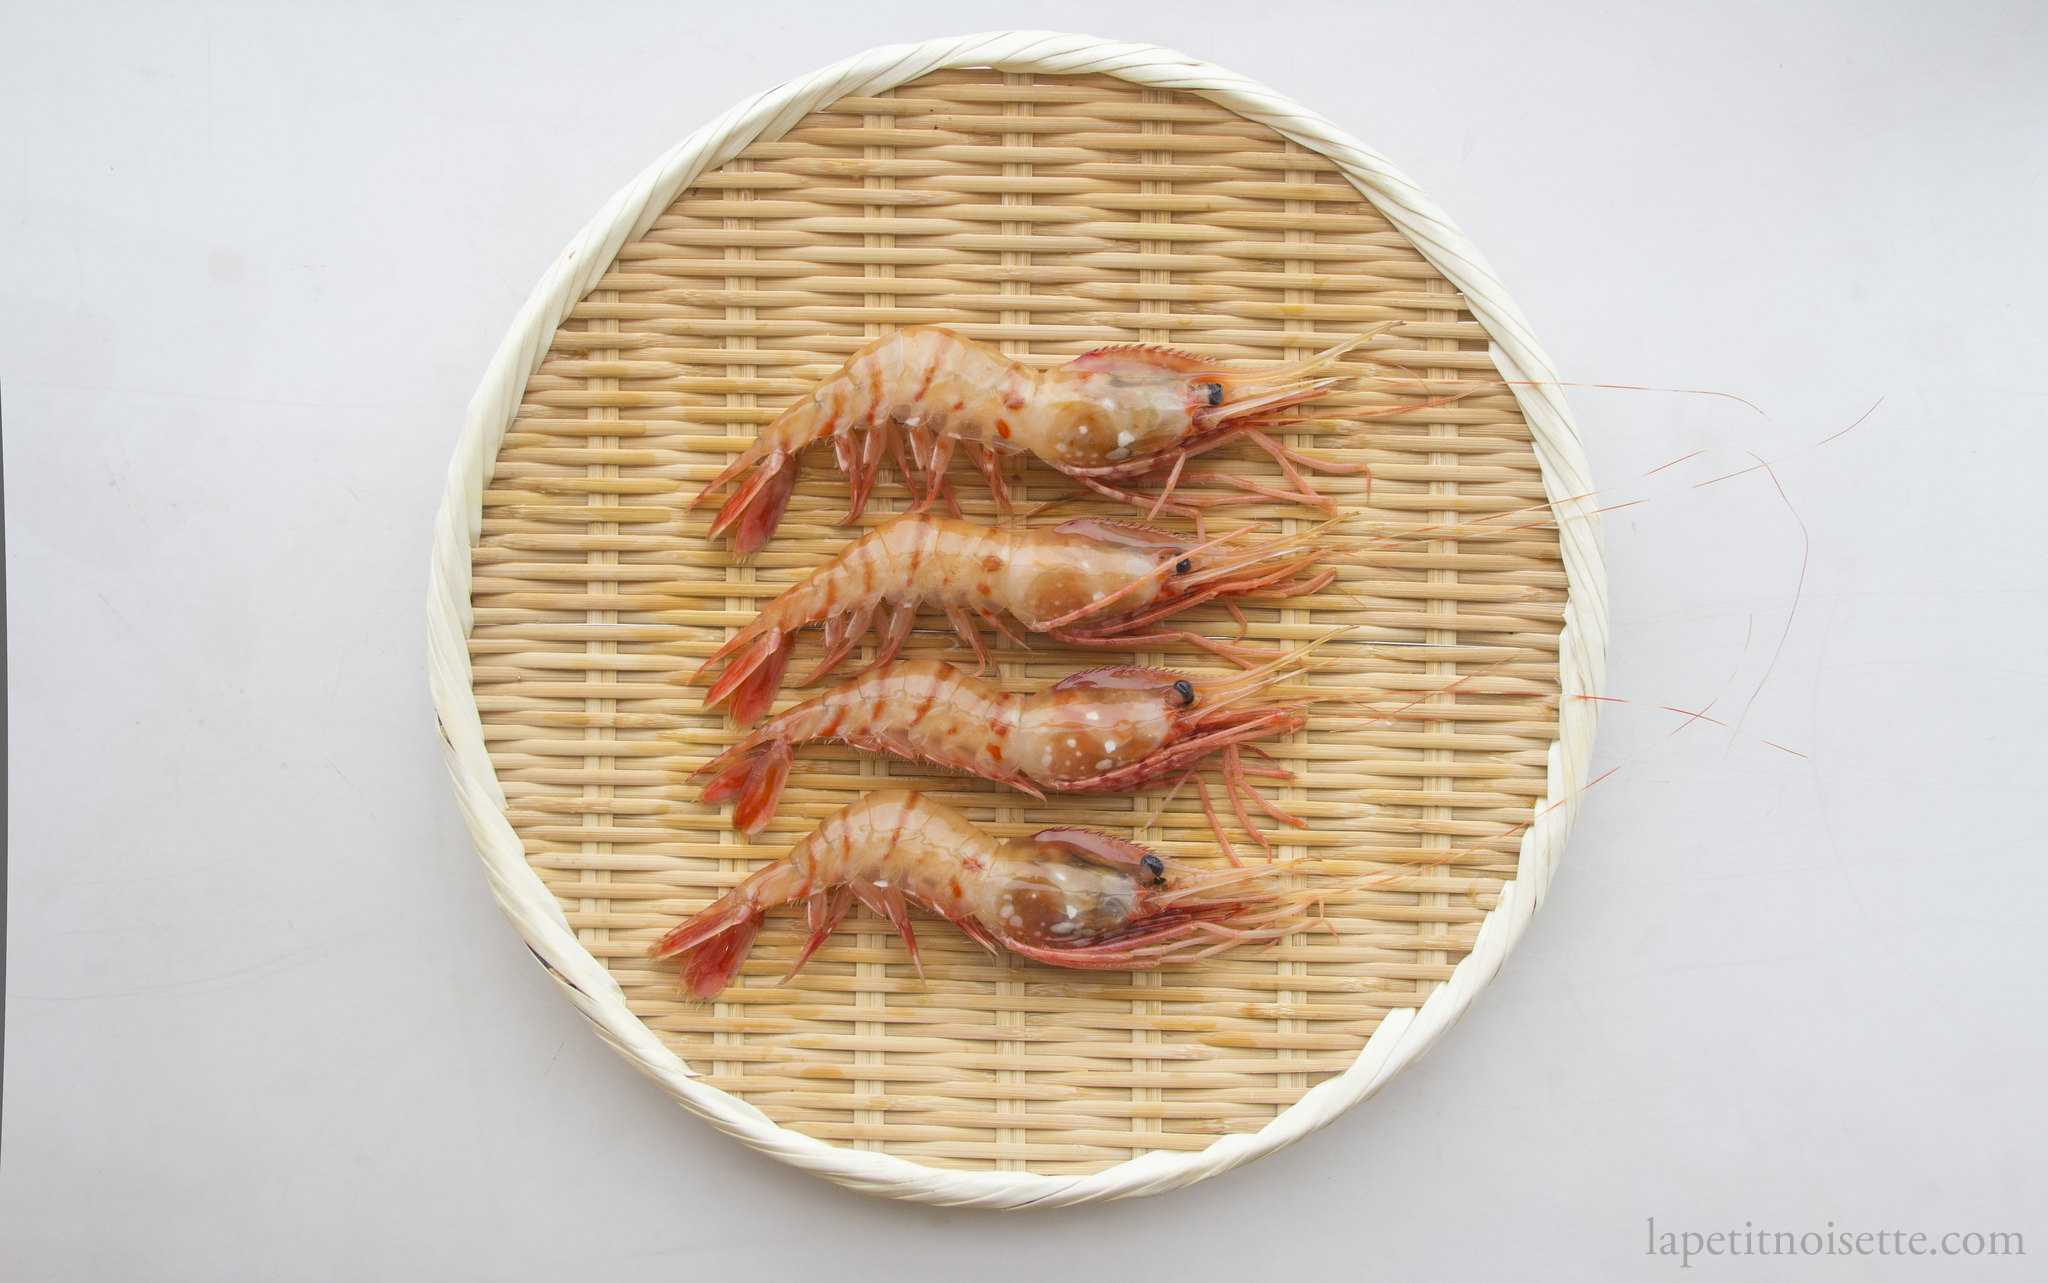 Four Botan shrimp showing the difference in freshness through a darker head colour.